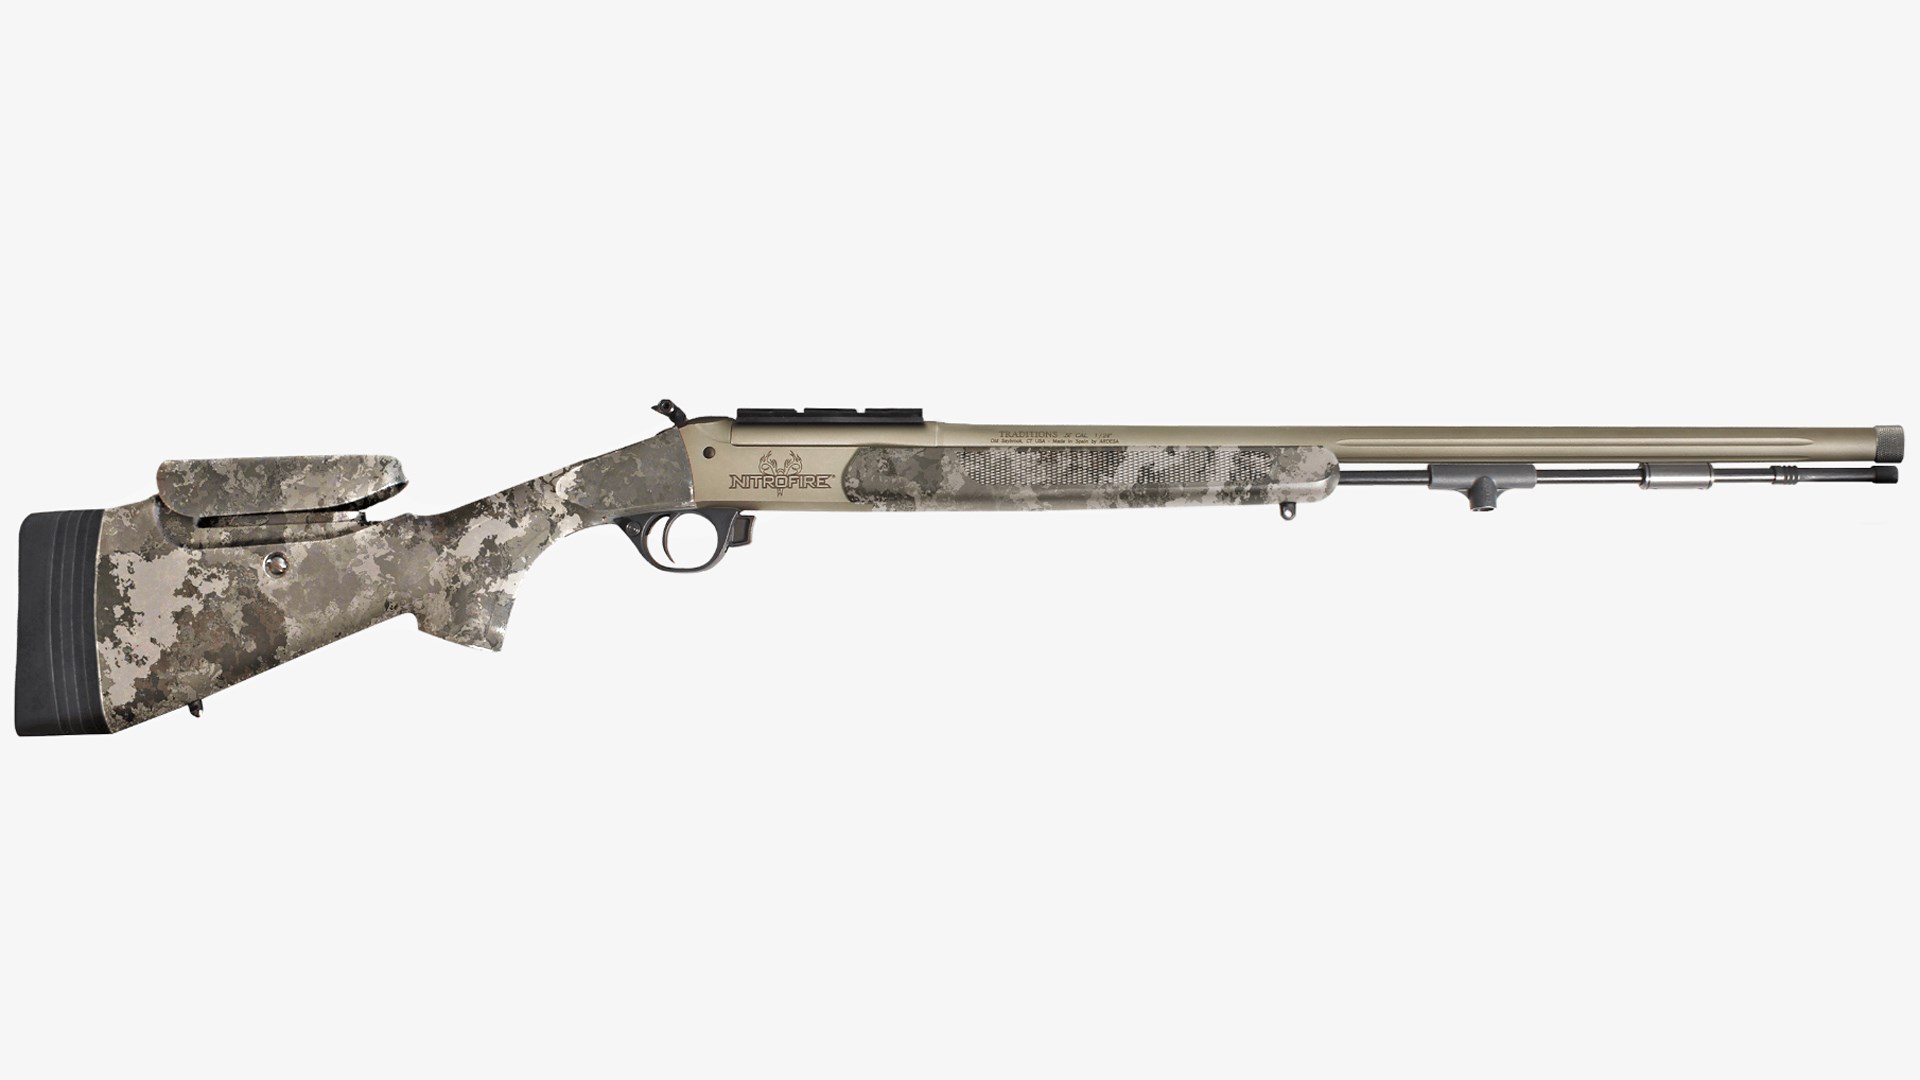 Right side of the Traditions Pro Series muzzleloader with a camouflage finish.